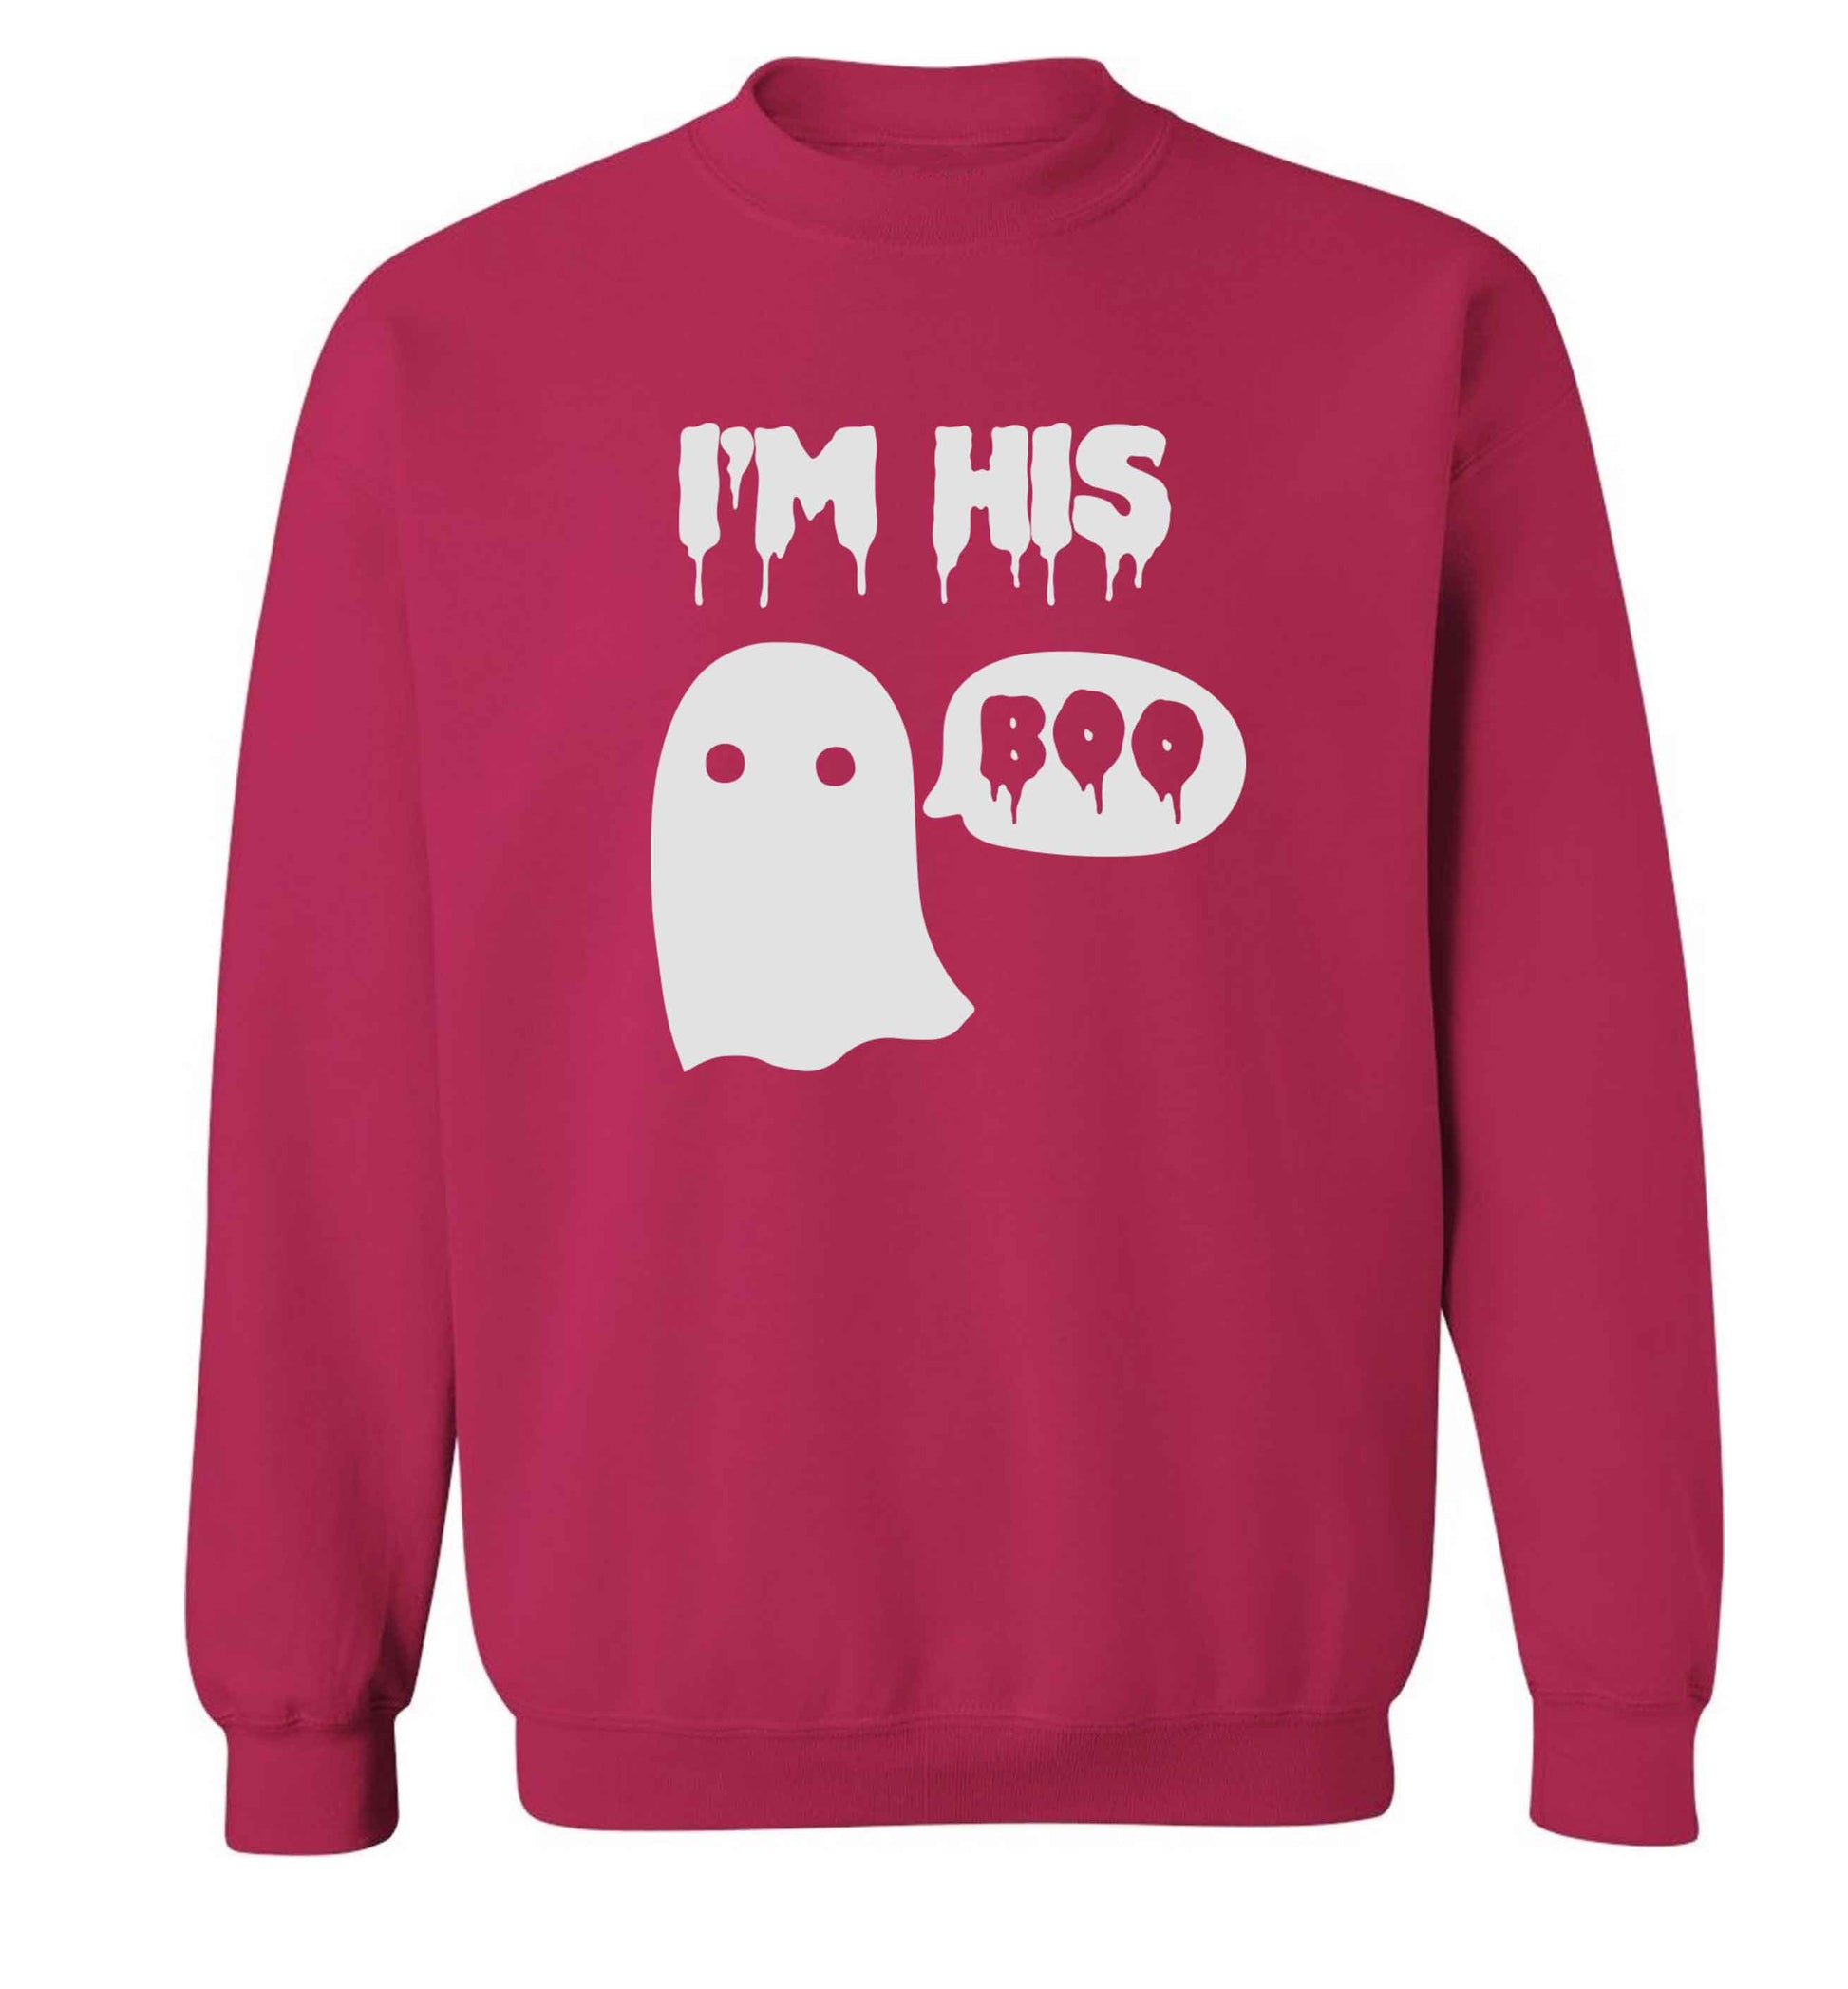 I'm his boo adult's unisex pink sweater 2XL